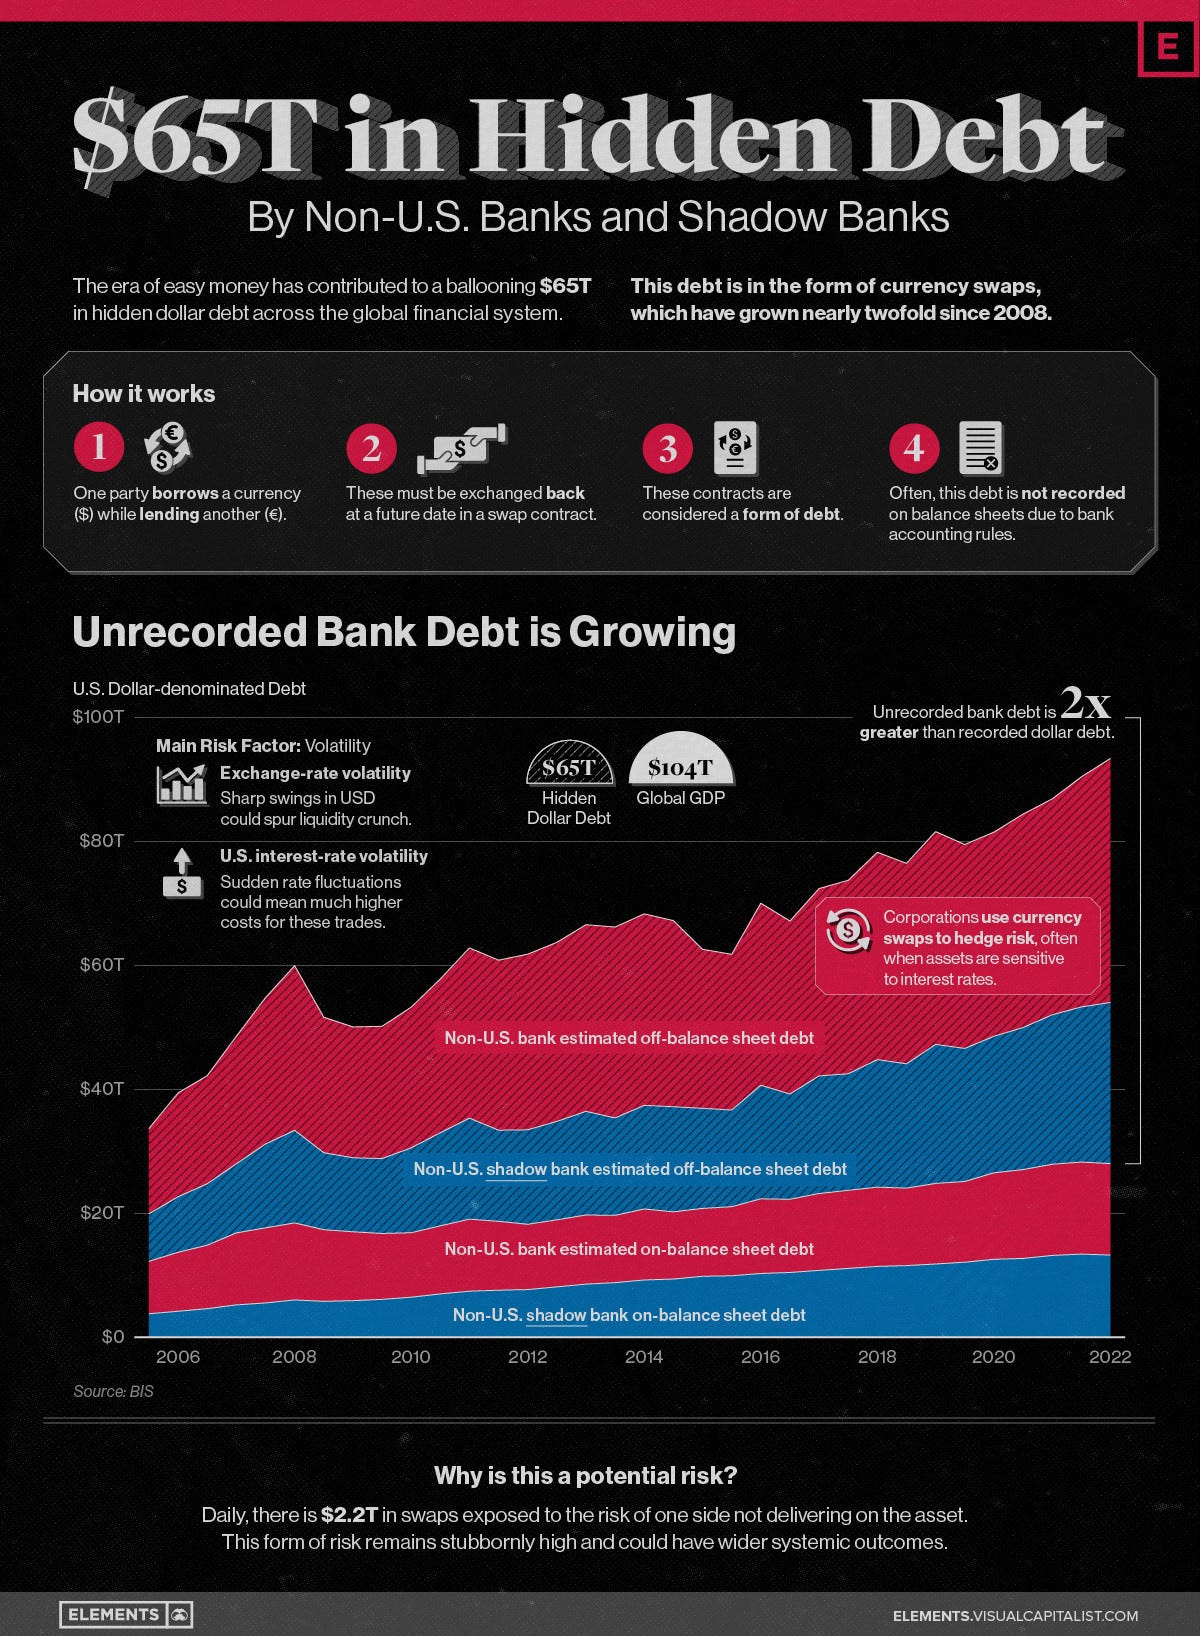 The rise in hidden dollar debt across non-US financial institutions.